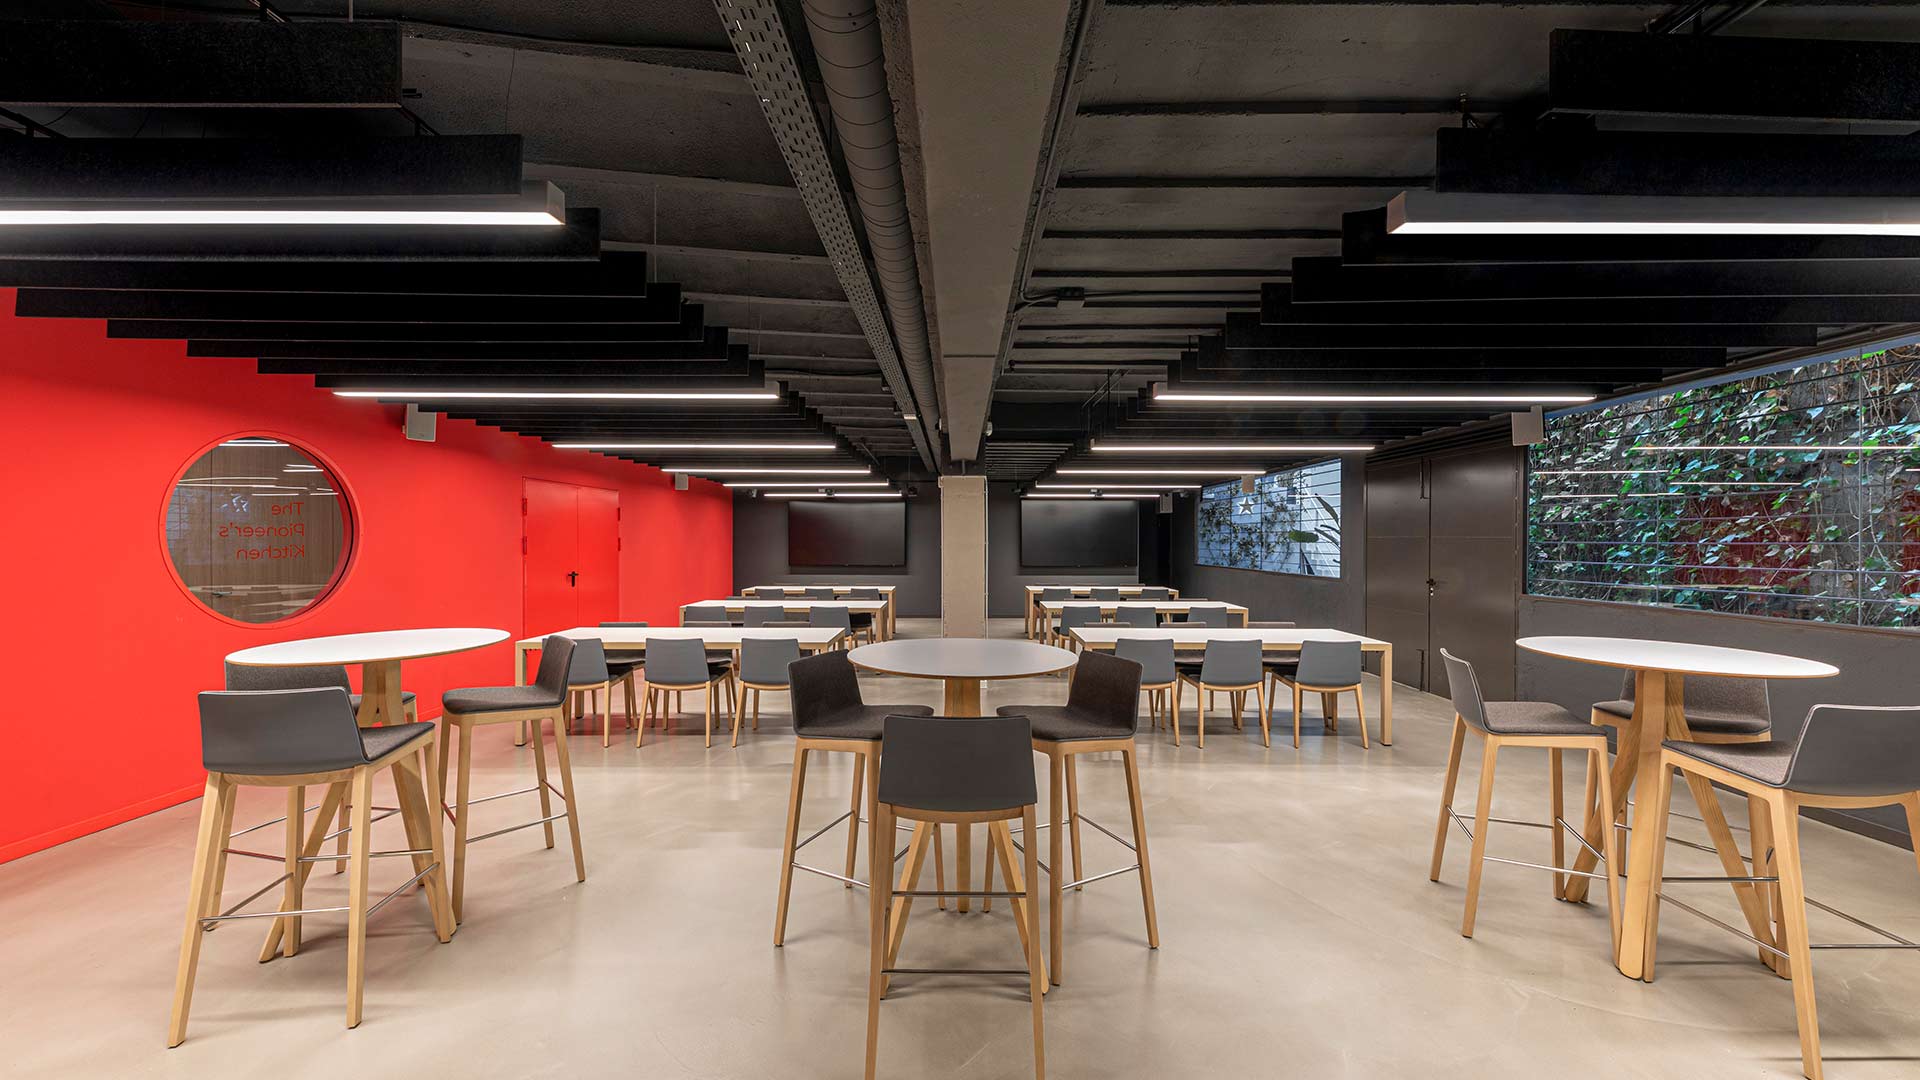 Project management and building of Morillas offices in Barcelona